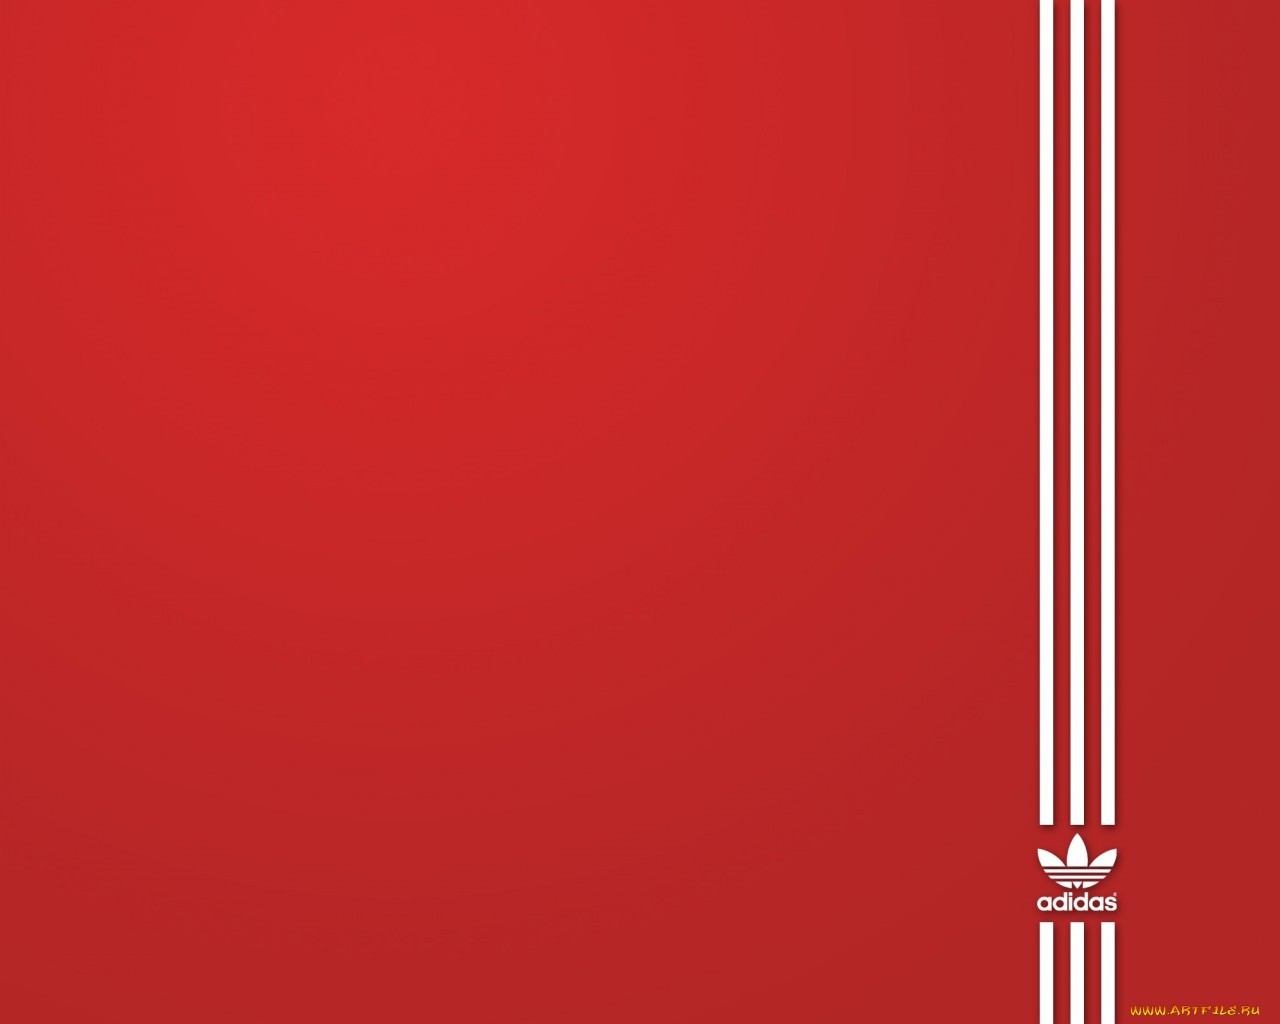 23068 download wallpaper logos, adidas, brands, background, red screensavers and pictures for free